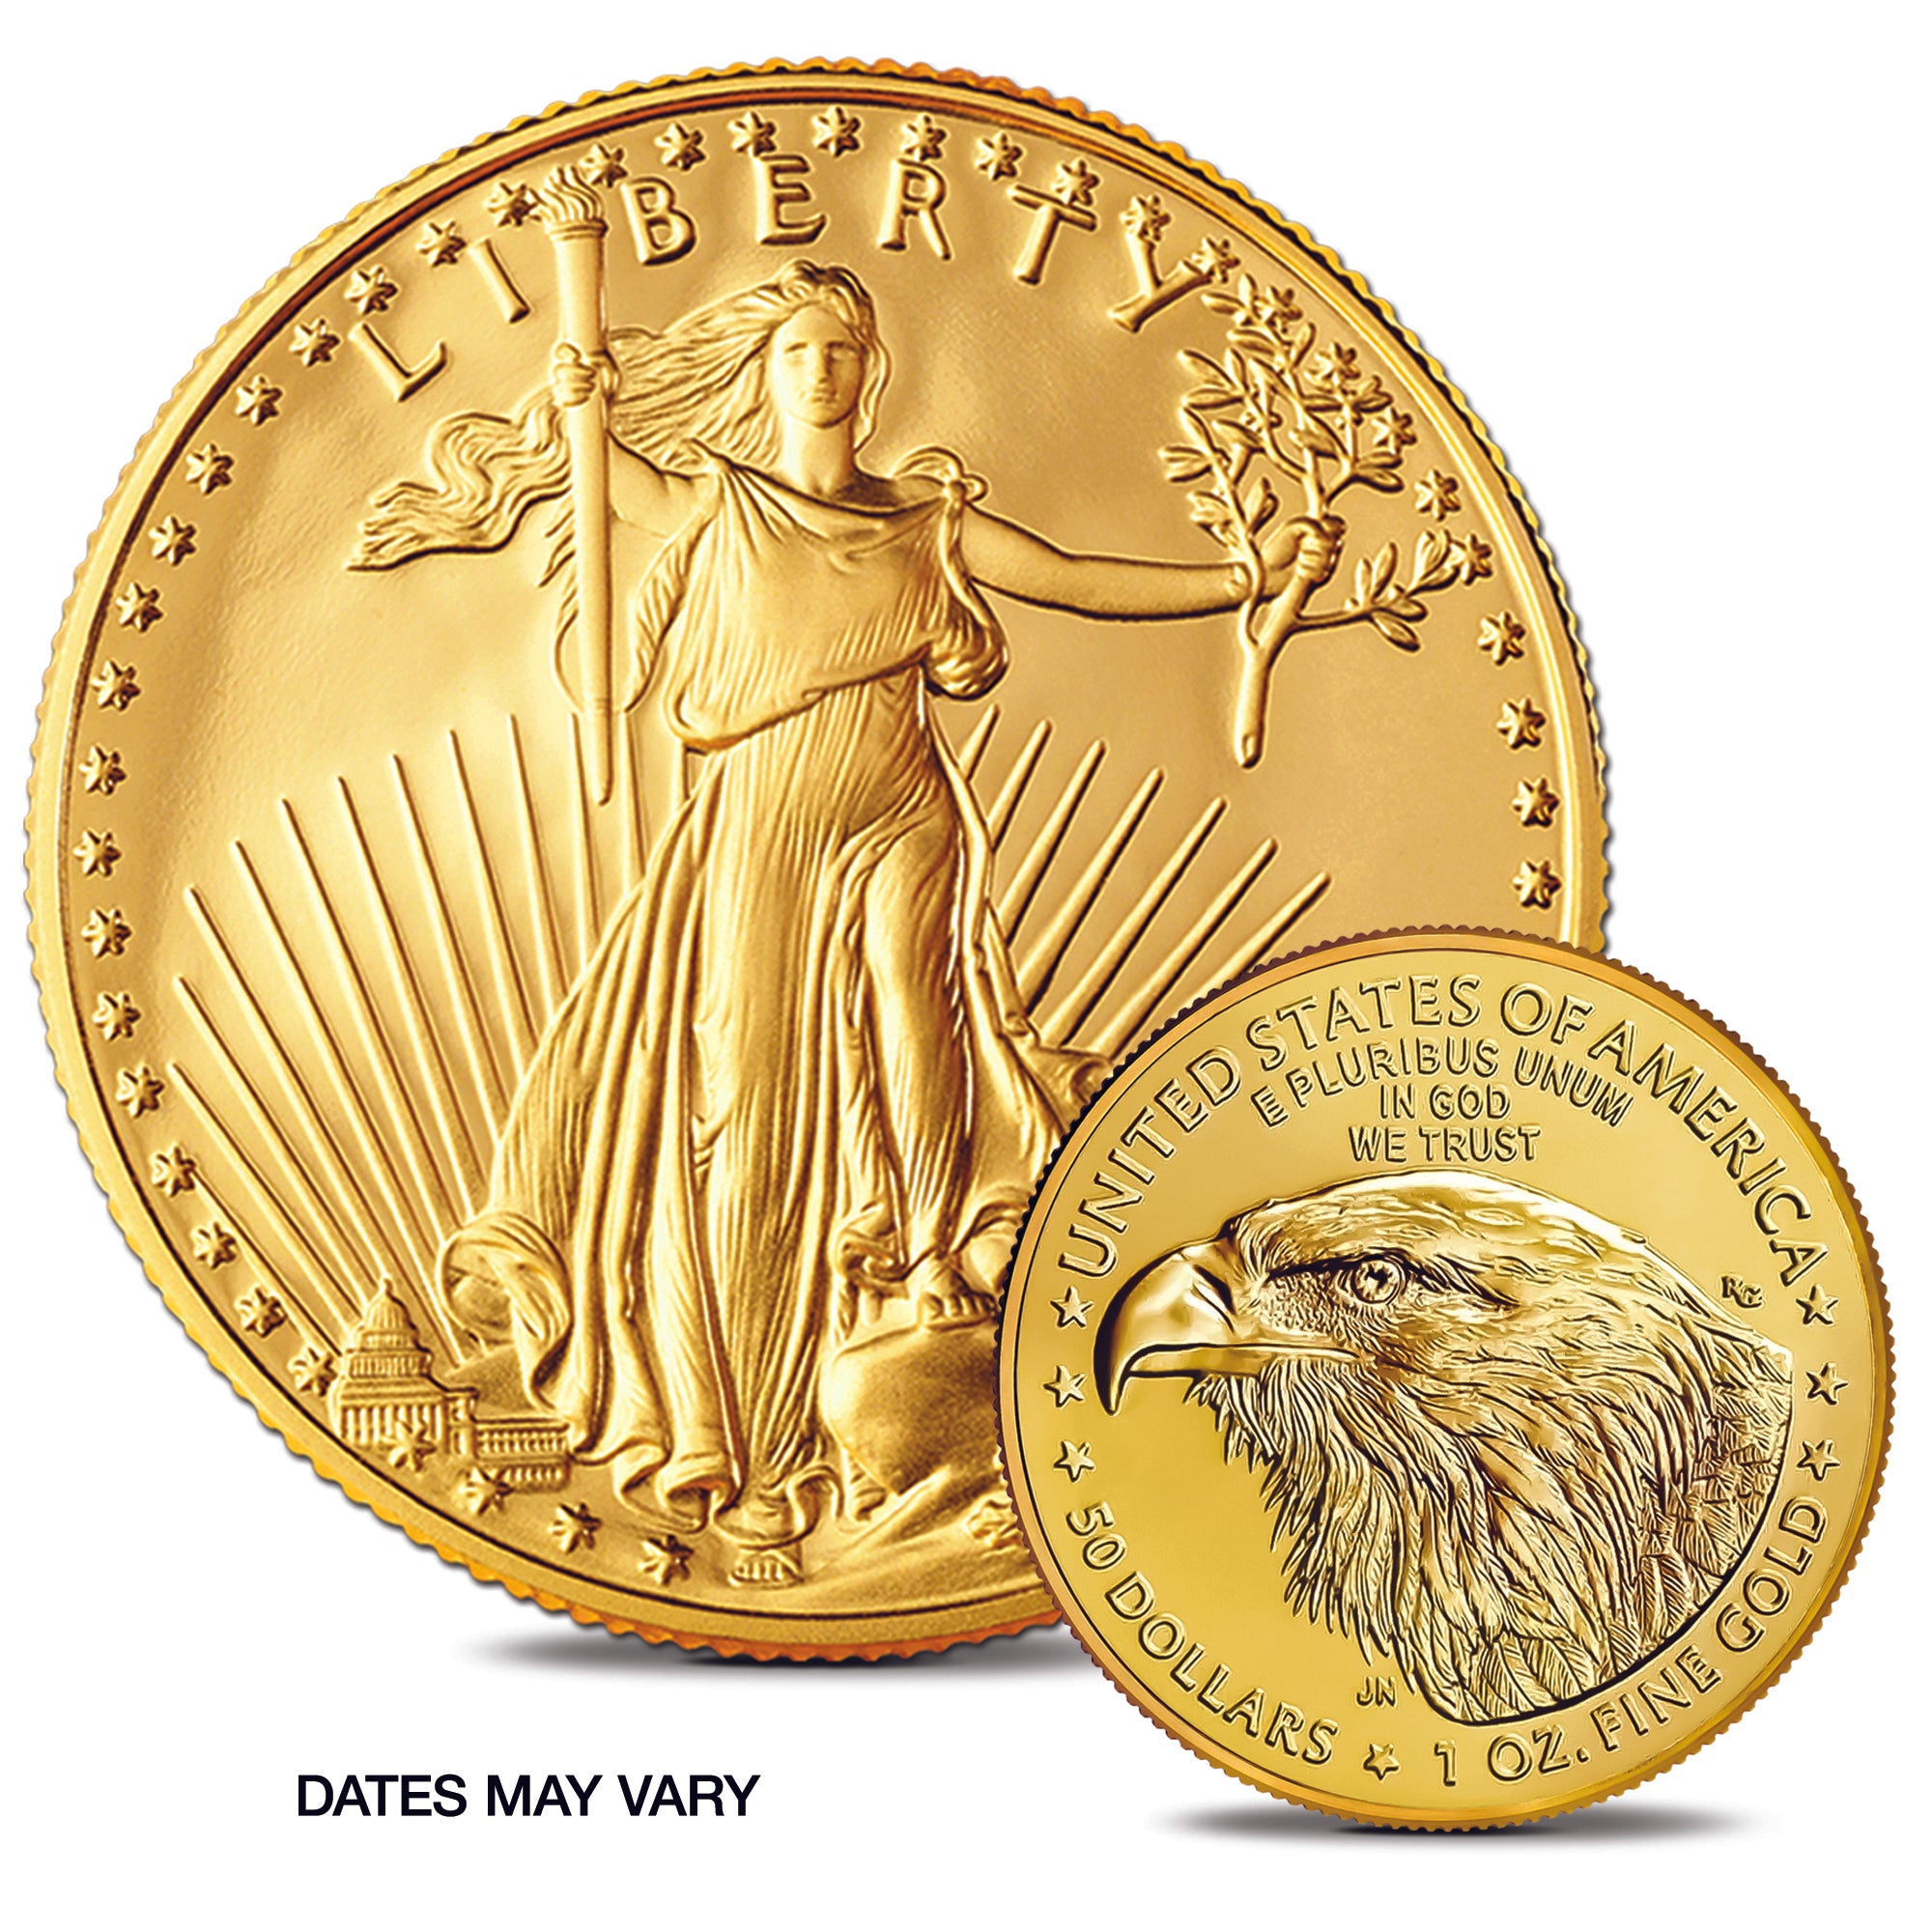 How to Spot a Fake American Eagle Gold Coin